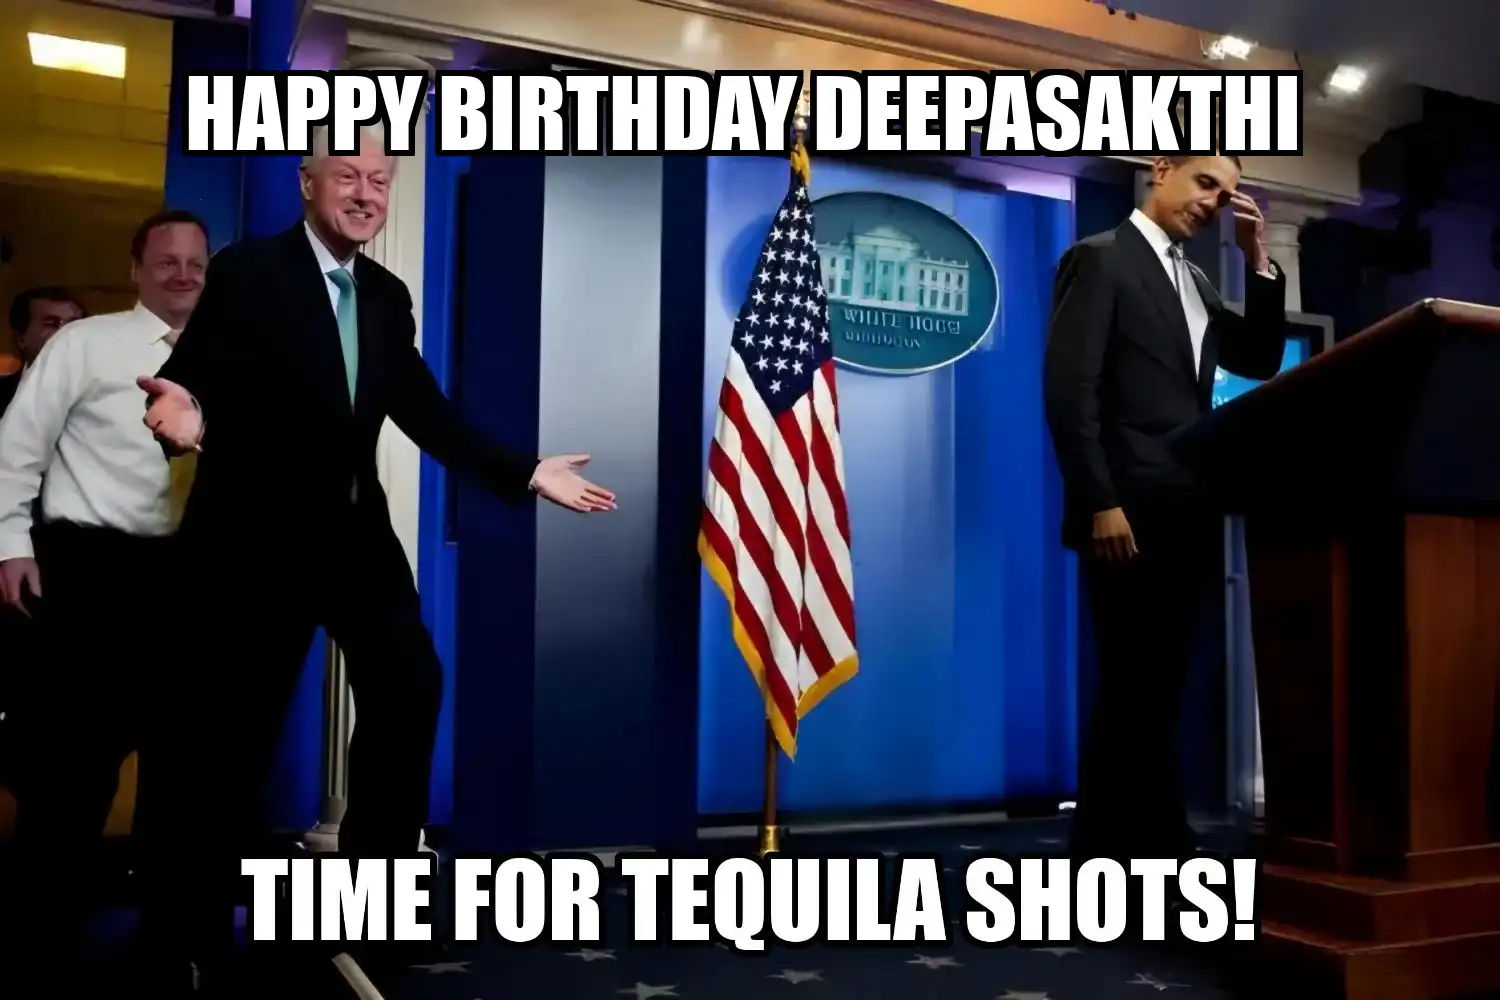 Happy Birthday Deepasakthi Time For Tequila Shots Memes